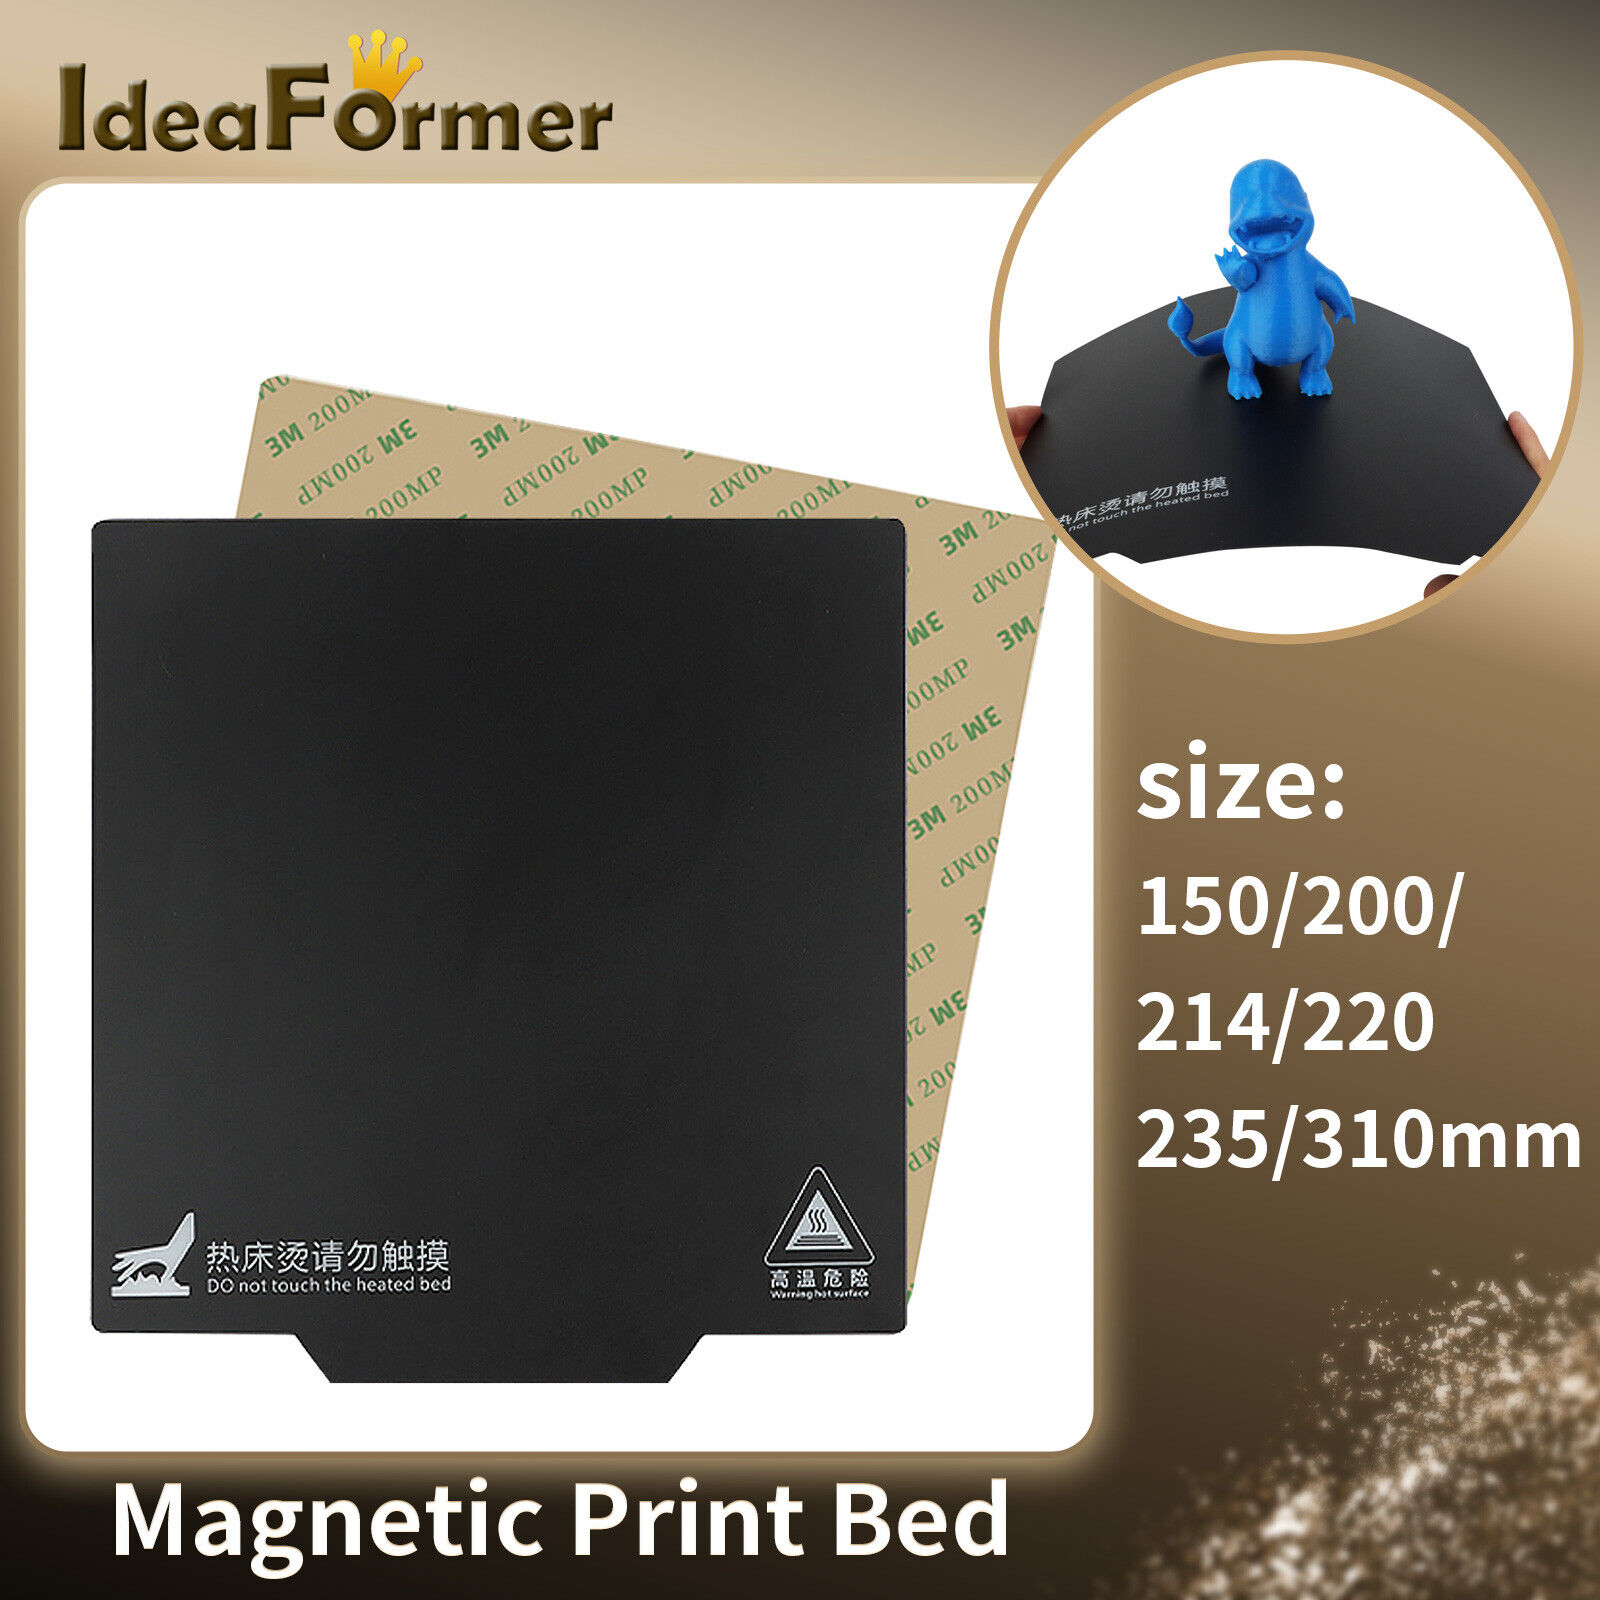 3D Printer Magnetic Build Sheet Heated Bed Surface Print Bed for Ender3/5 CR10